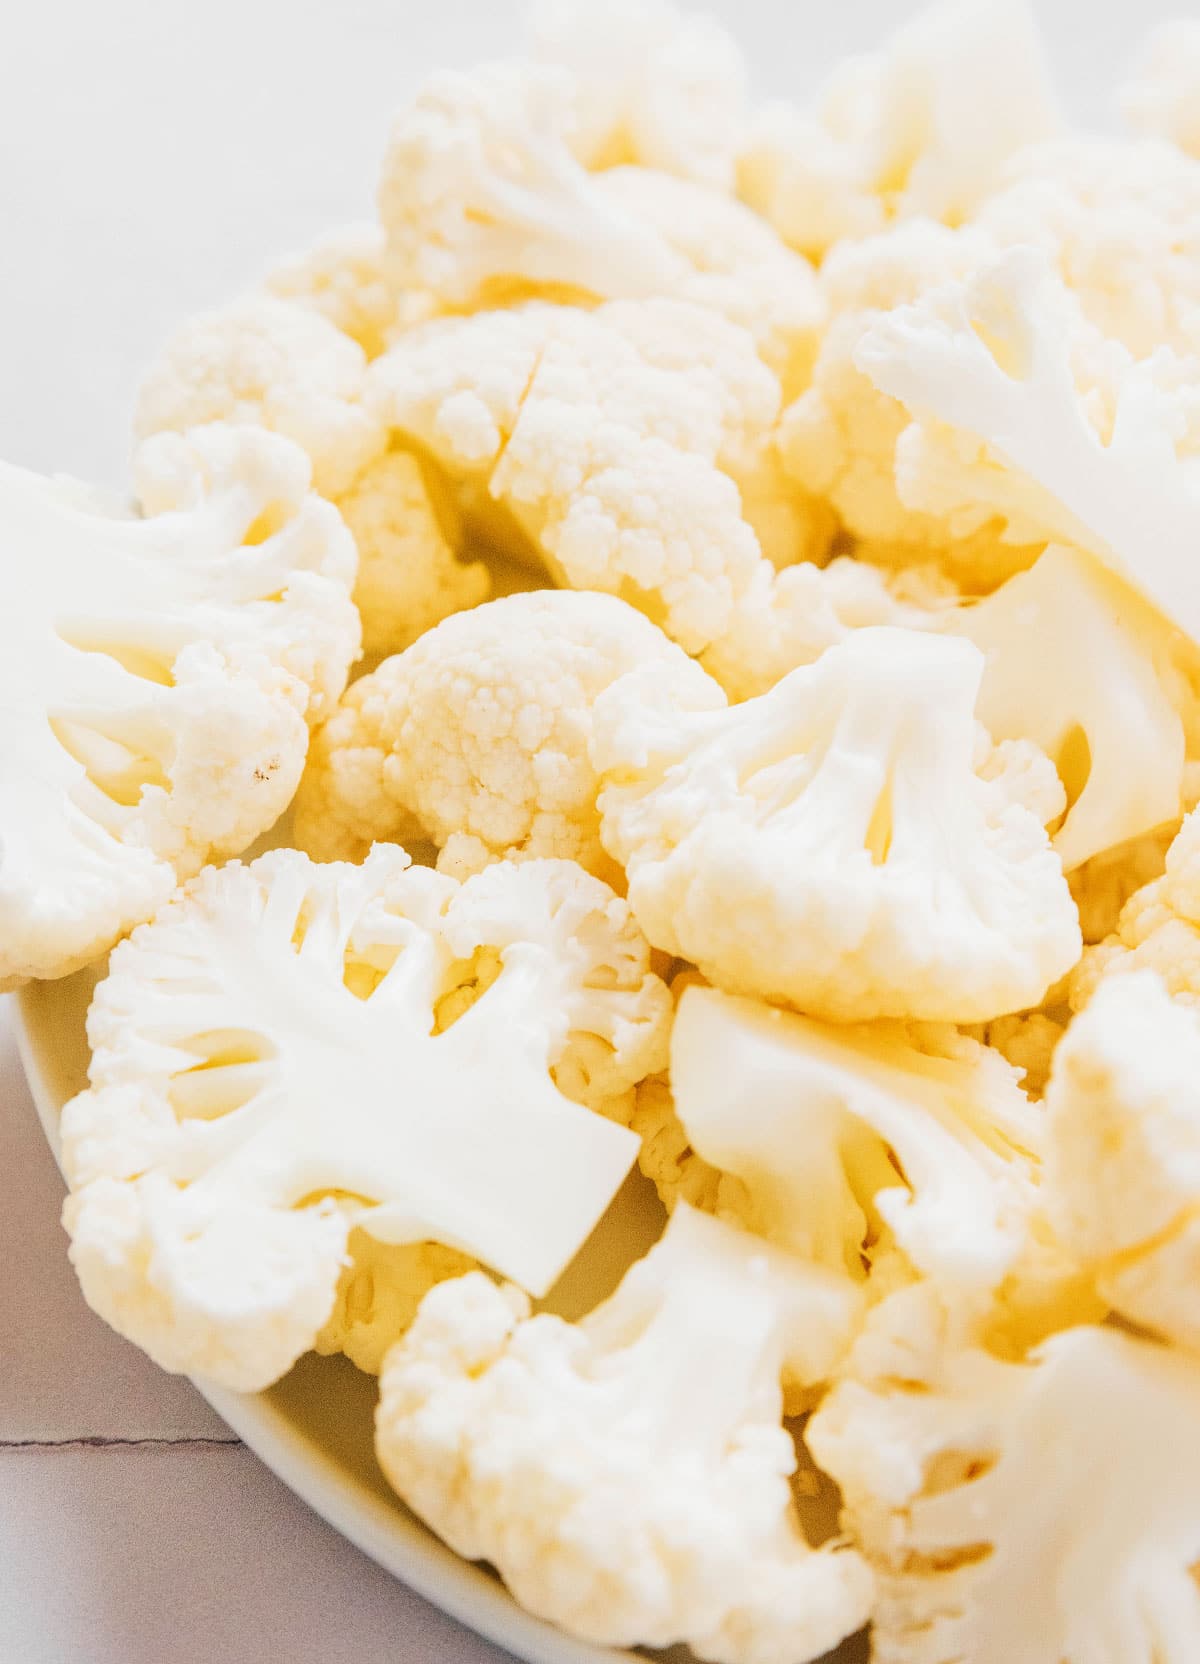 An up close view detailing the texture of cauliflower florets